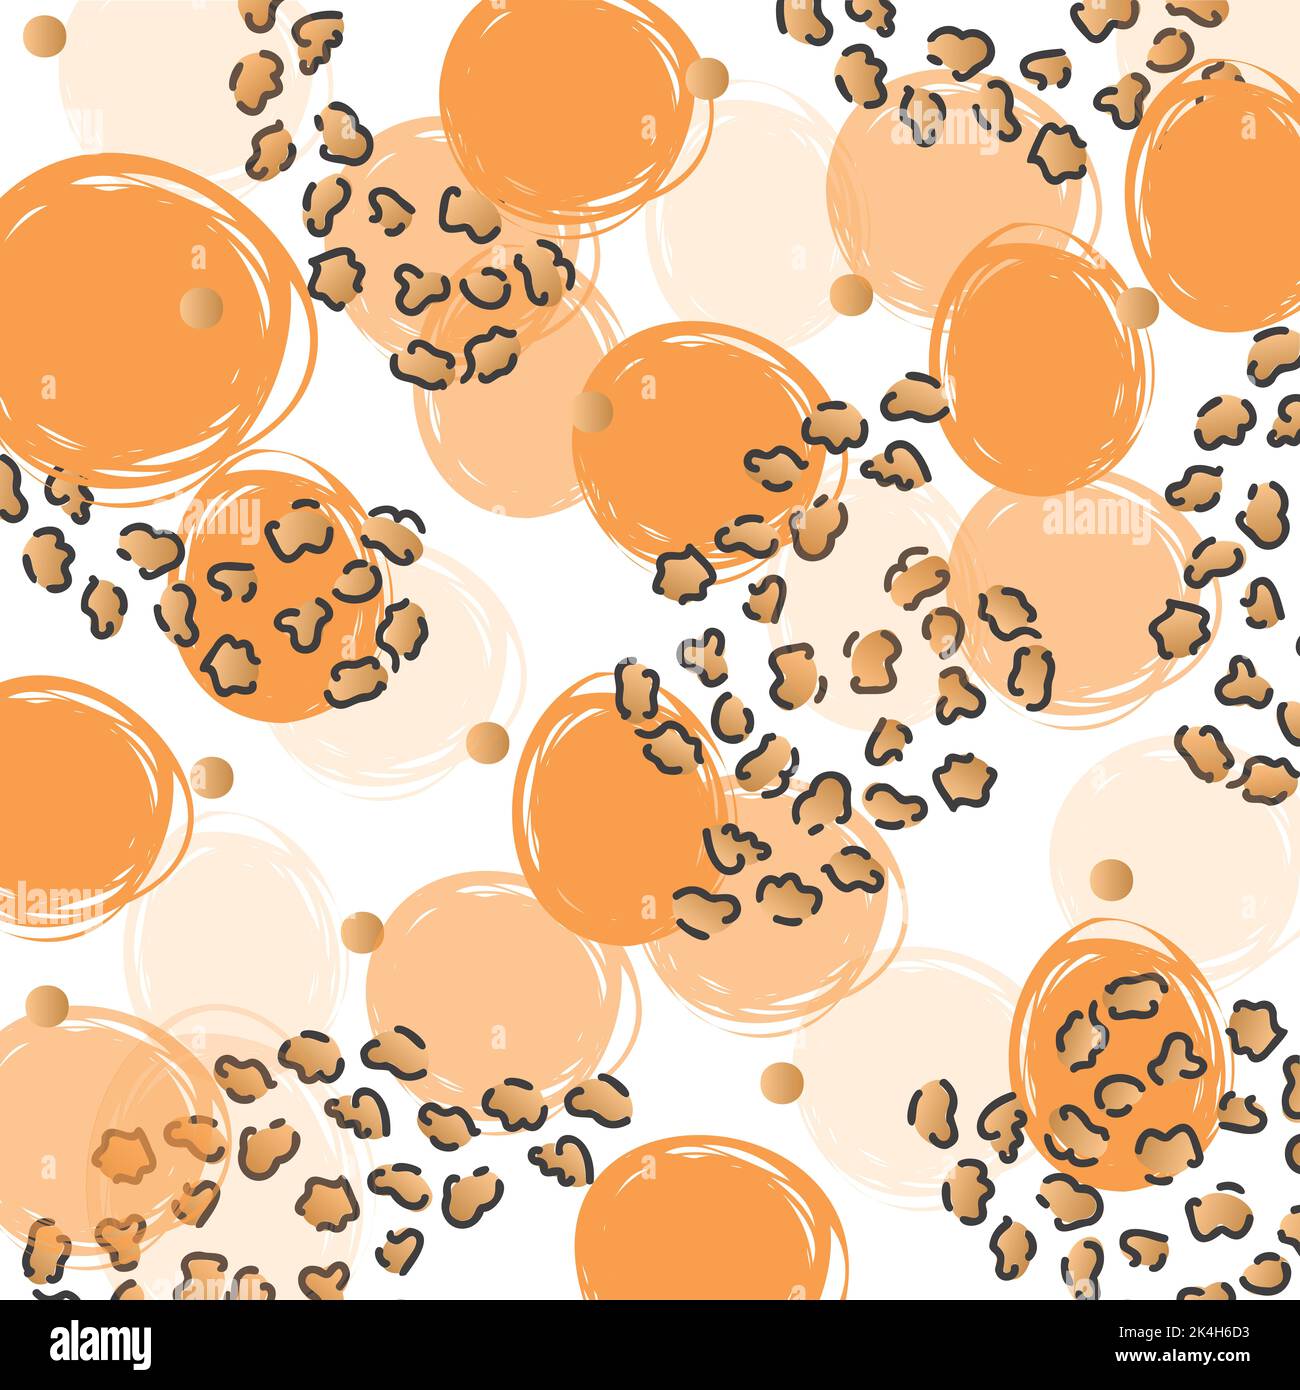 https://c8.alamy.com/comp/2K4H6D3/digitally-generated-seamless-pattern-with-orange-polka-dots-against-white-background-illustrations-with-seamless-pattern-background-concept-2K4H6D3.jpg